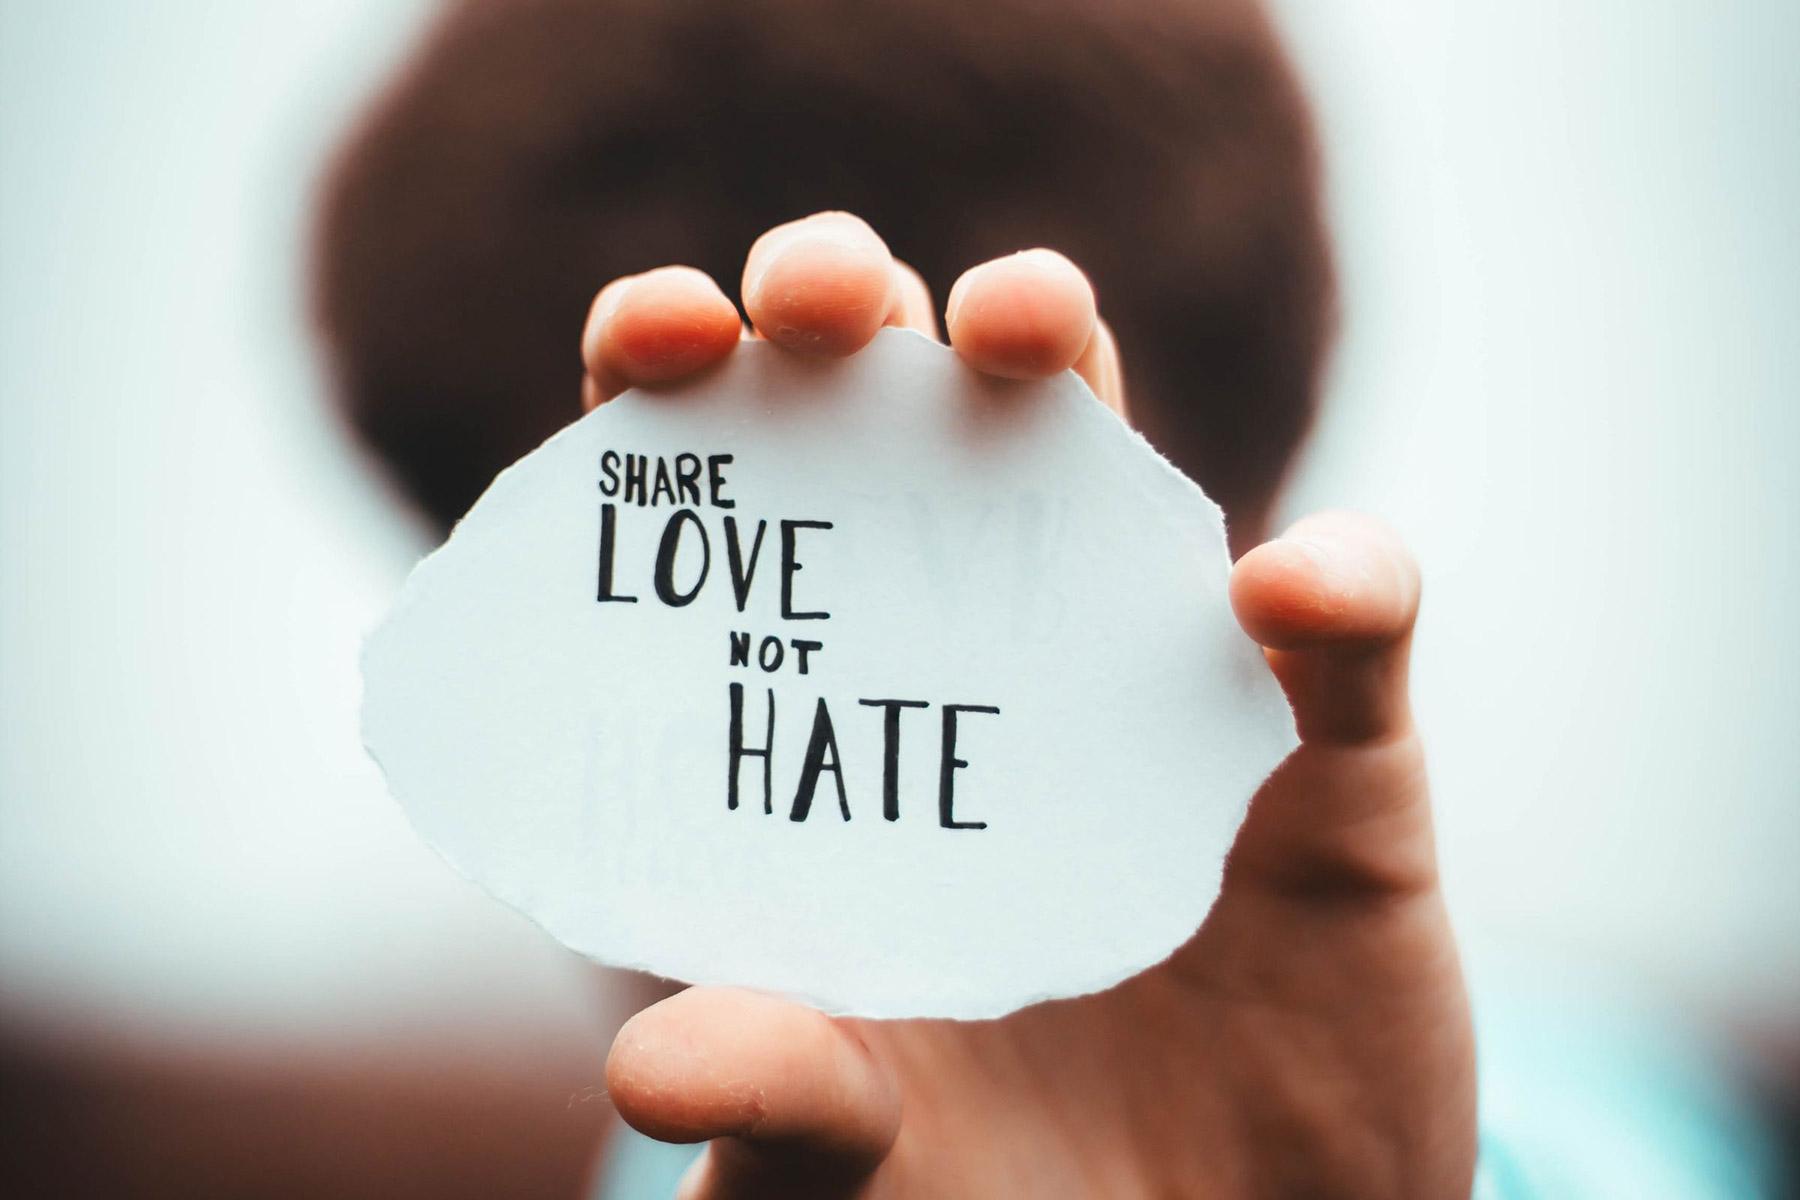 The World Association for Christian Communication has published a new report on countering hate speech online. Photo: Unsplash/Dan Edge